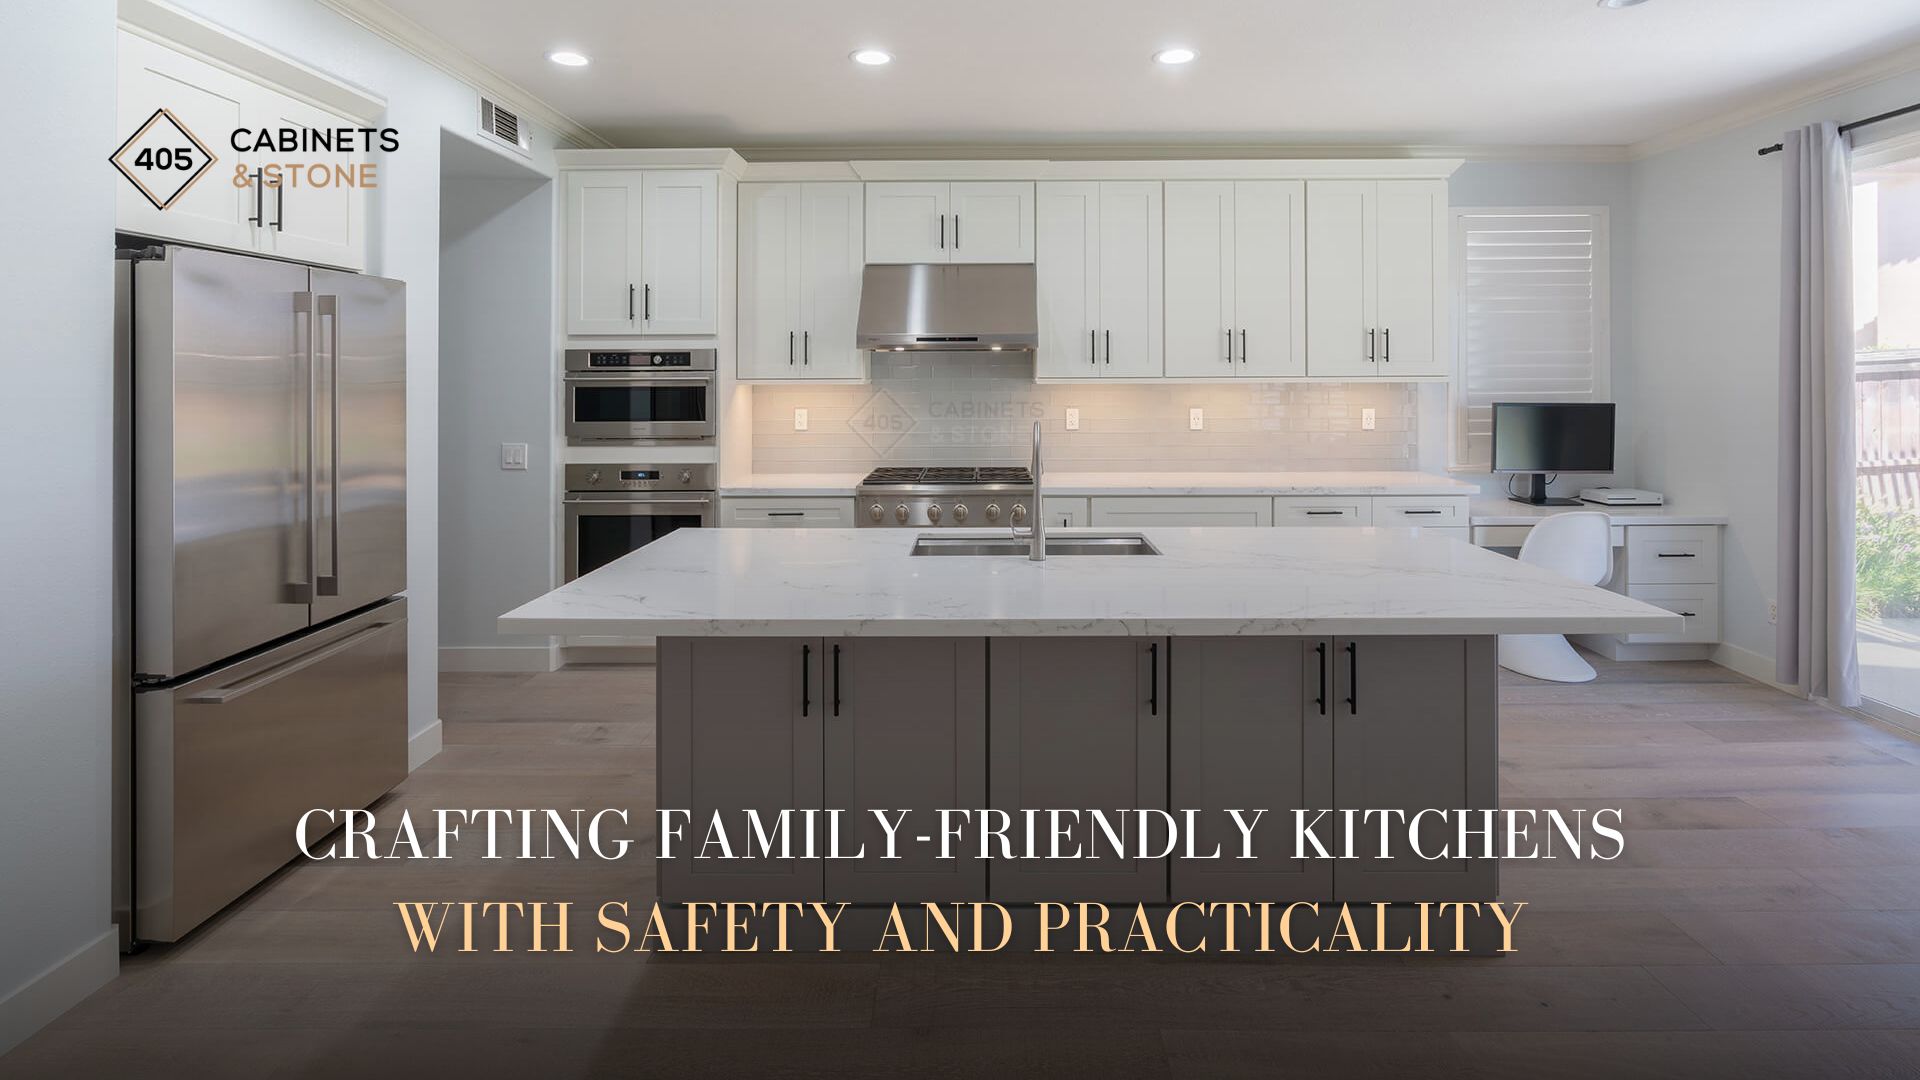 Crafting Family-Friendly Kitchens with Safety and Practicality